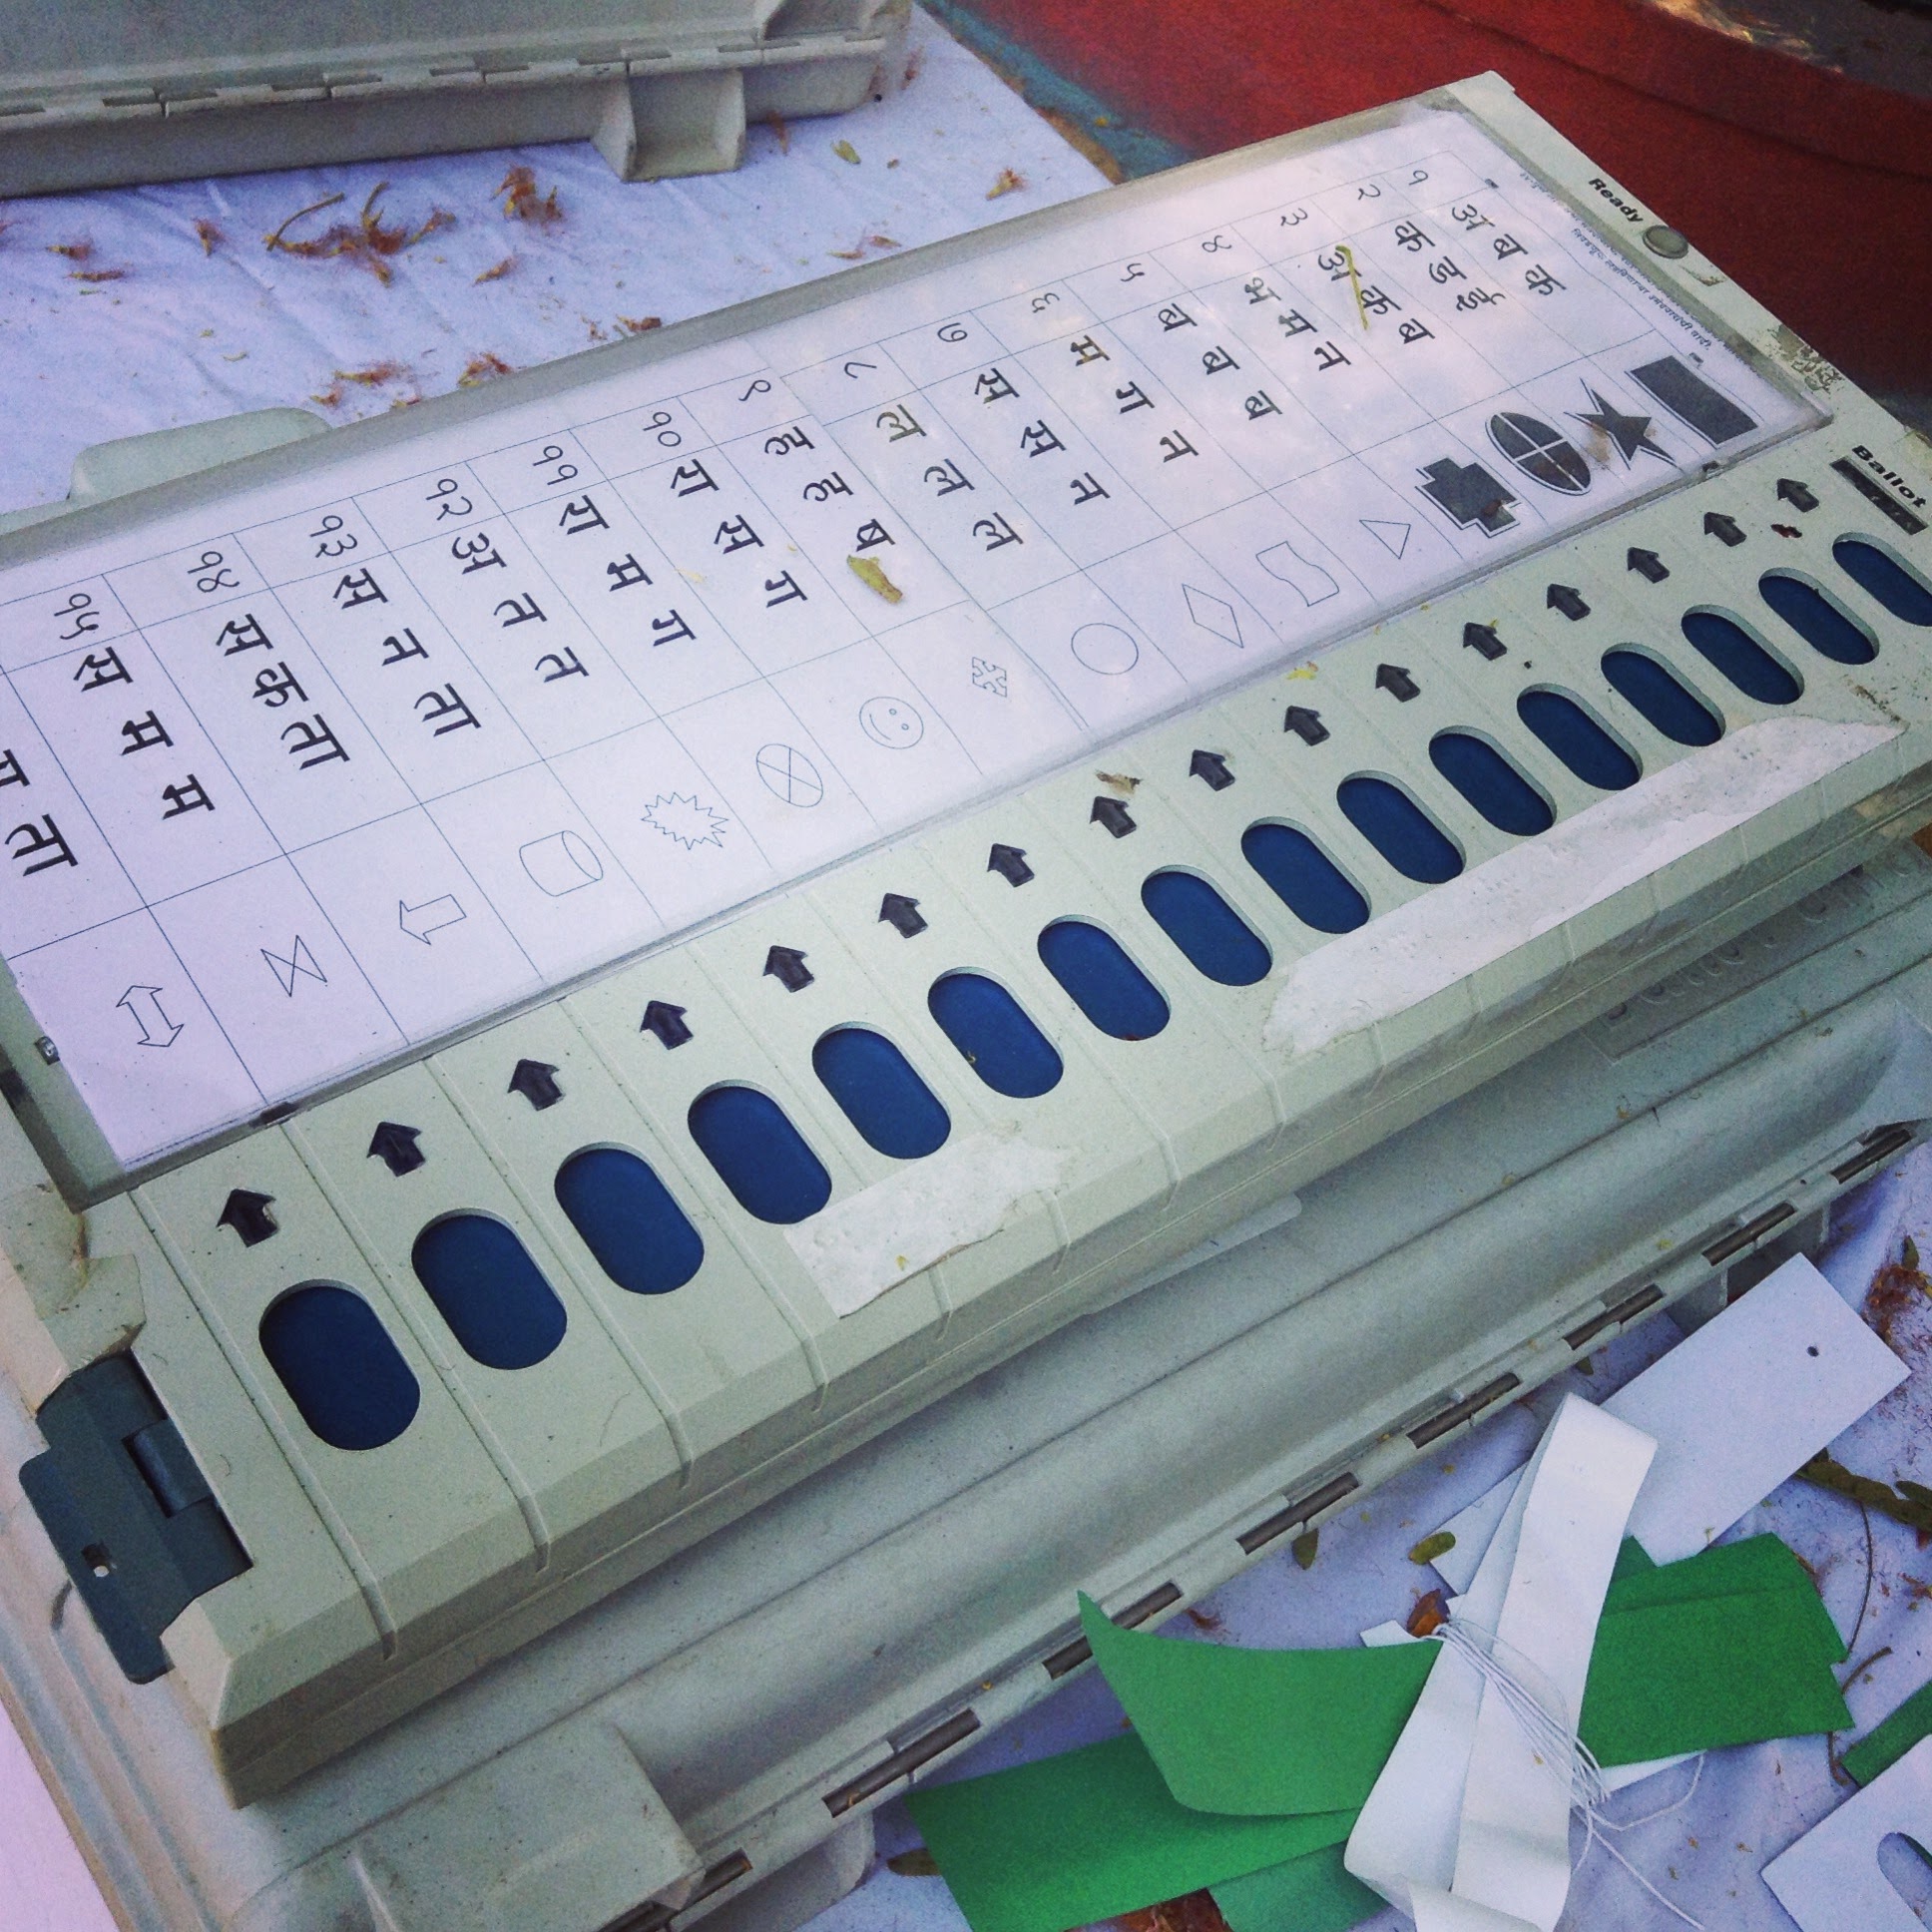 Syed Shuza who claimed 2014 poll rigging is not our employee say EVM manufacturer